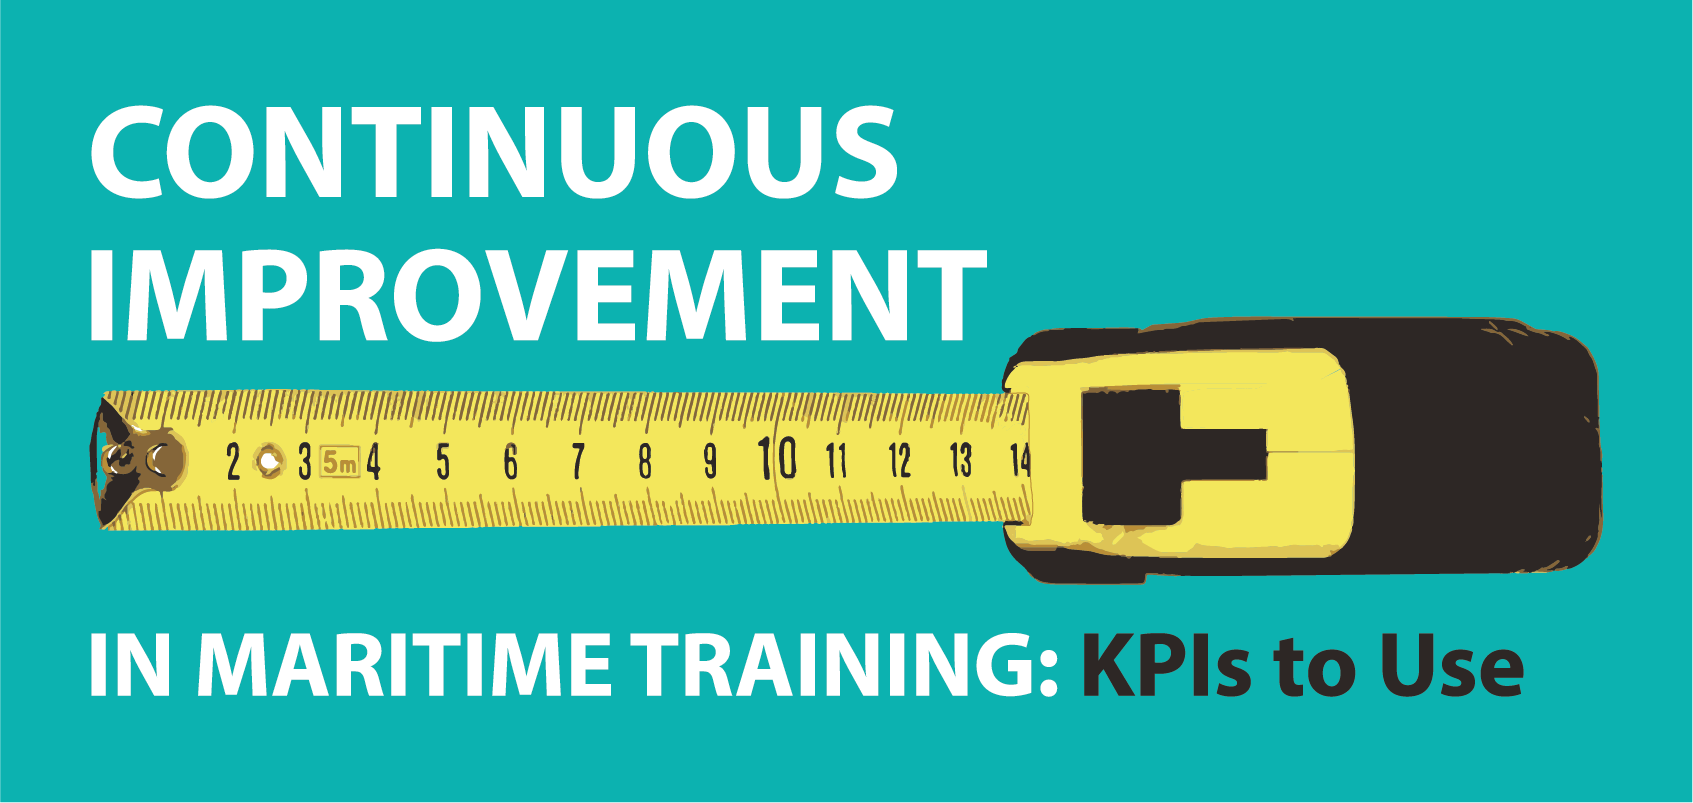 Webinar - Continuous Improvement in Maritime Training: KPIs to Use